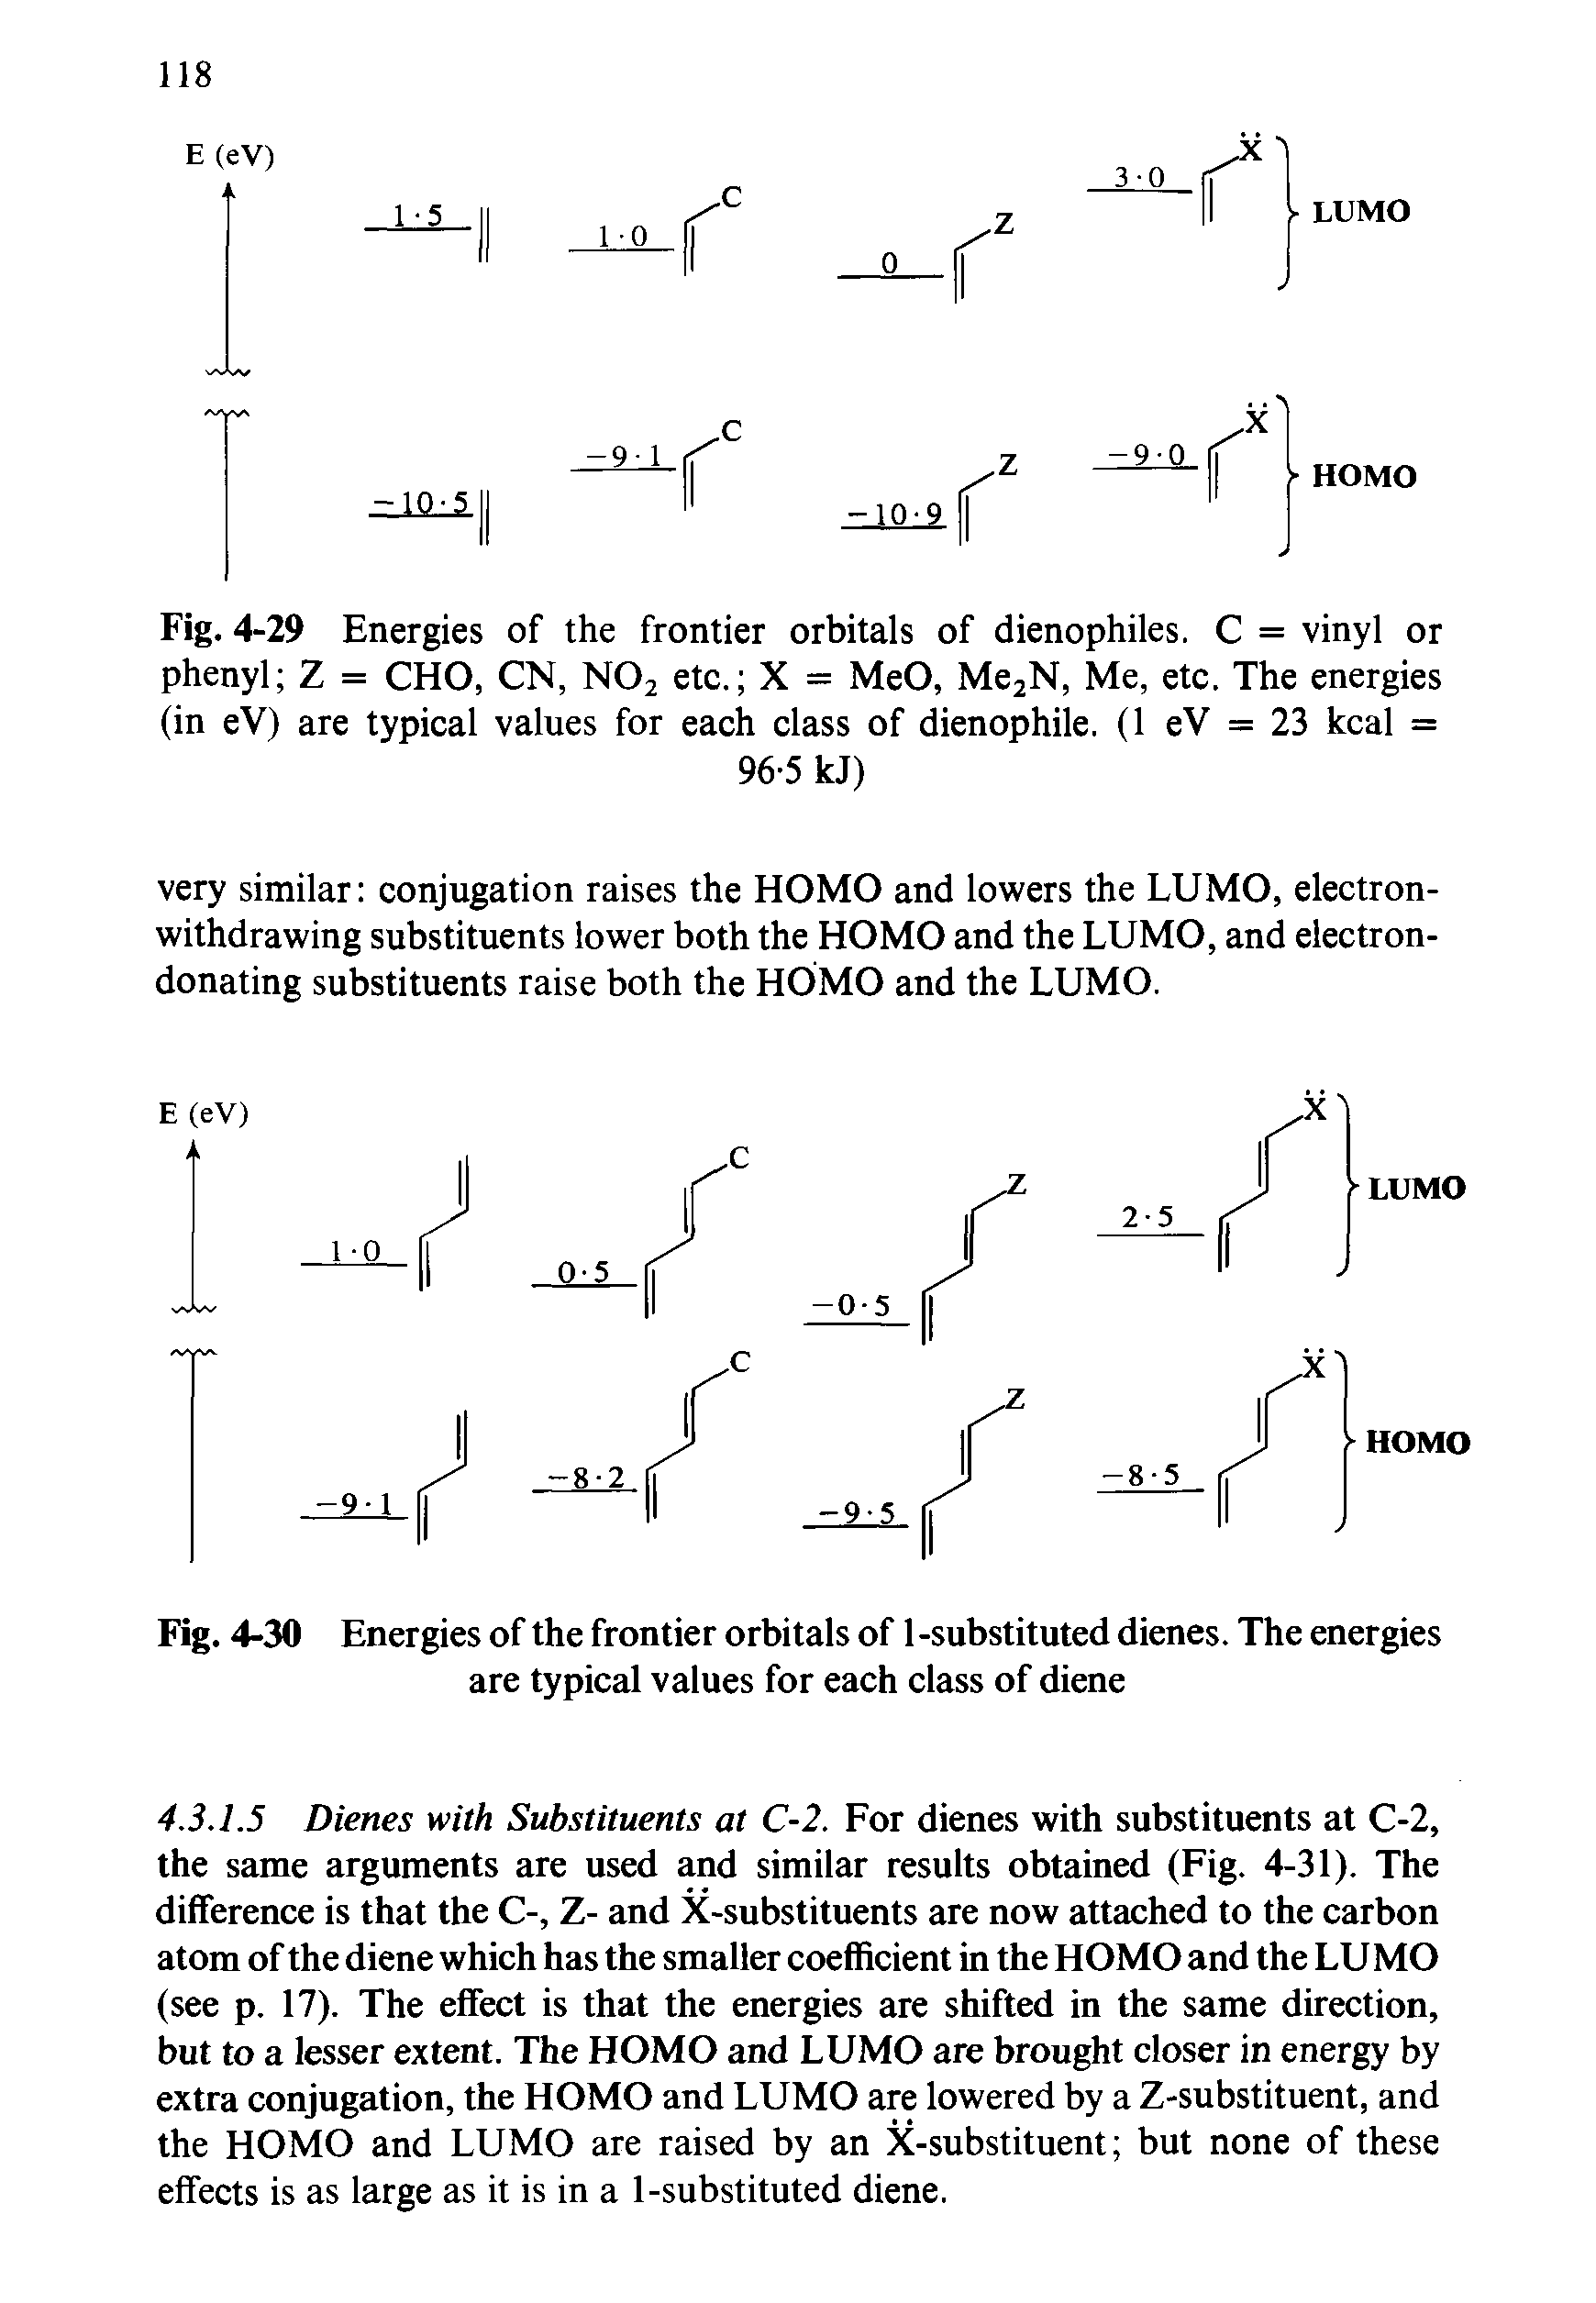 Fig. 4-30 Energies of the frontier orbitals of 1 -substituted dienes. The energies are typical values for each class of diene...